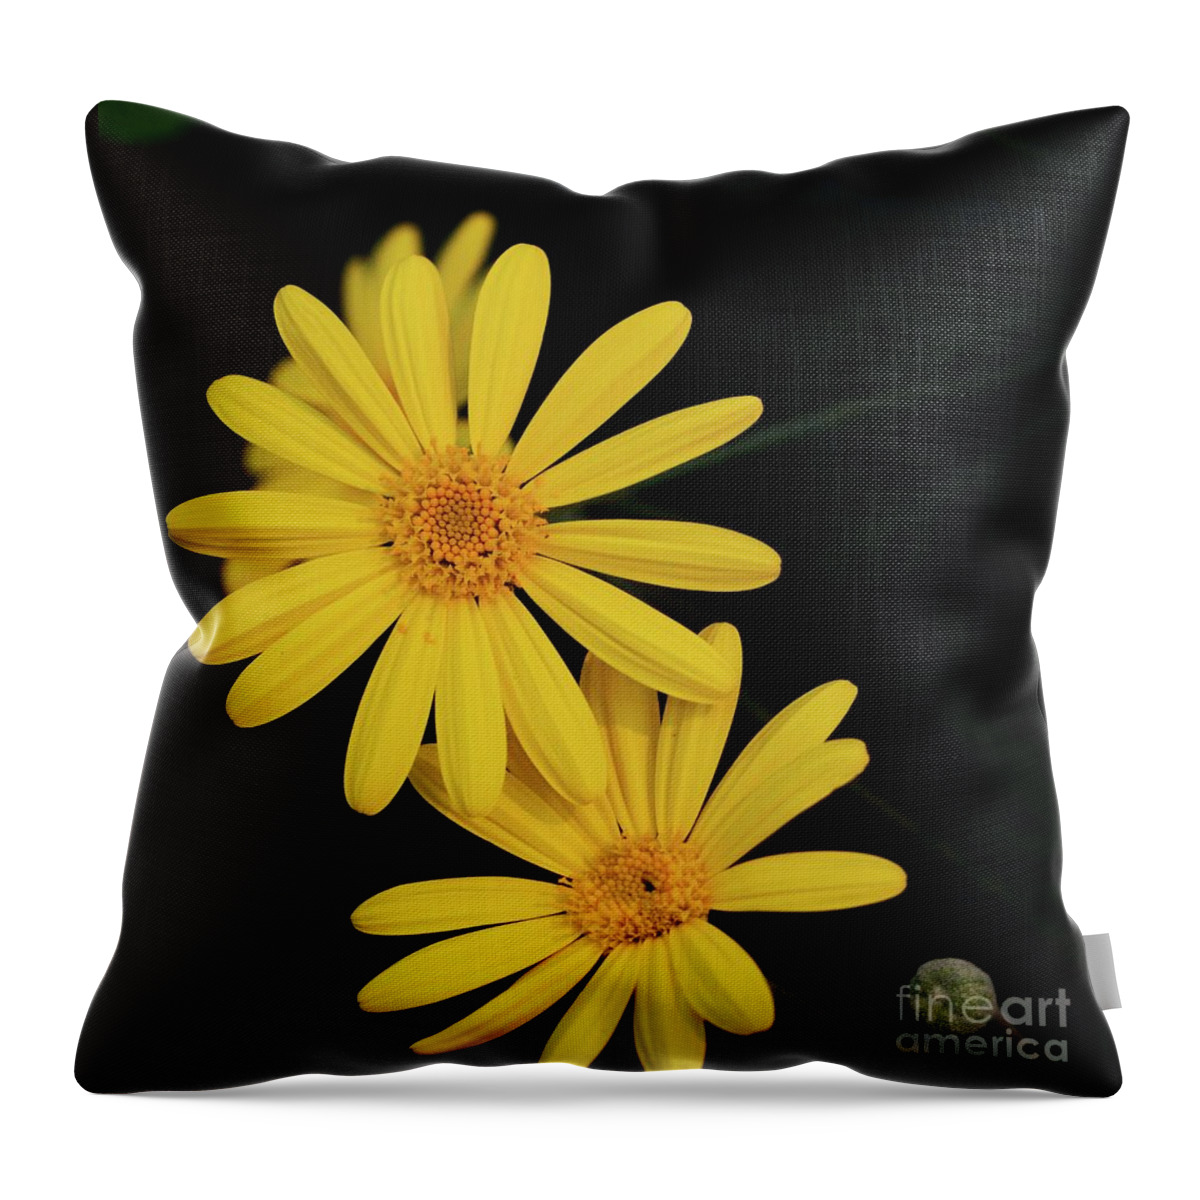 Daisy Throw Pillow featuring the photograph Daisy Daisy and a Bud by Cindy Manero